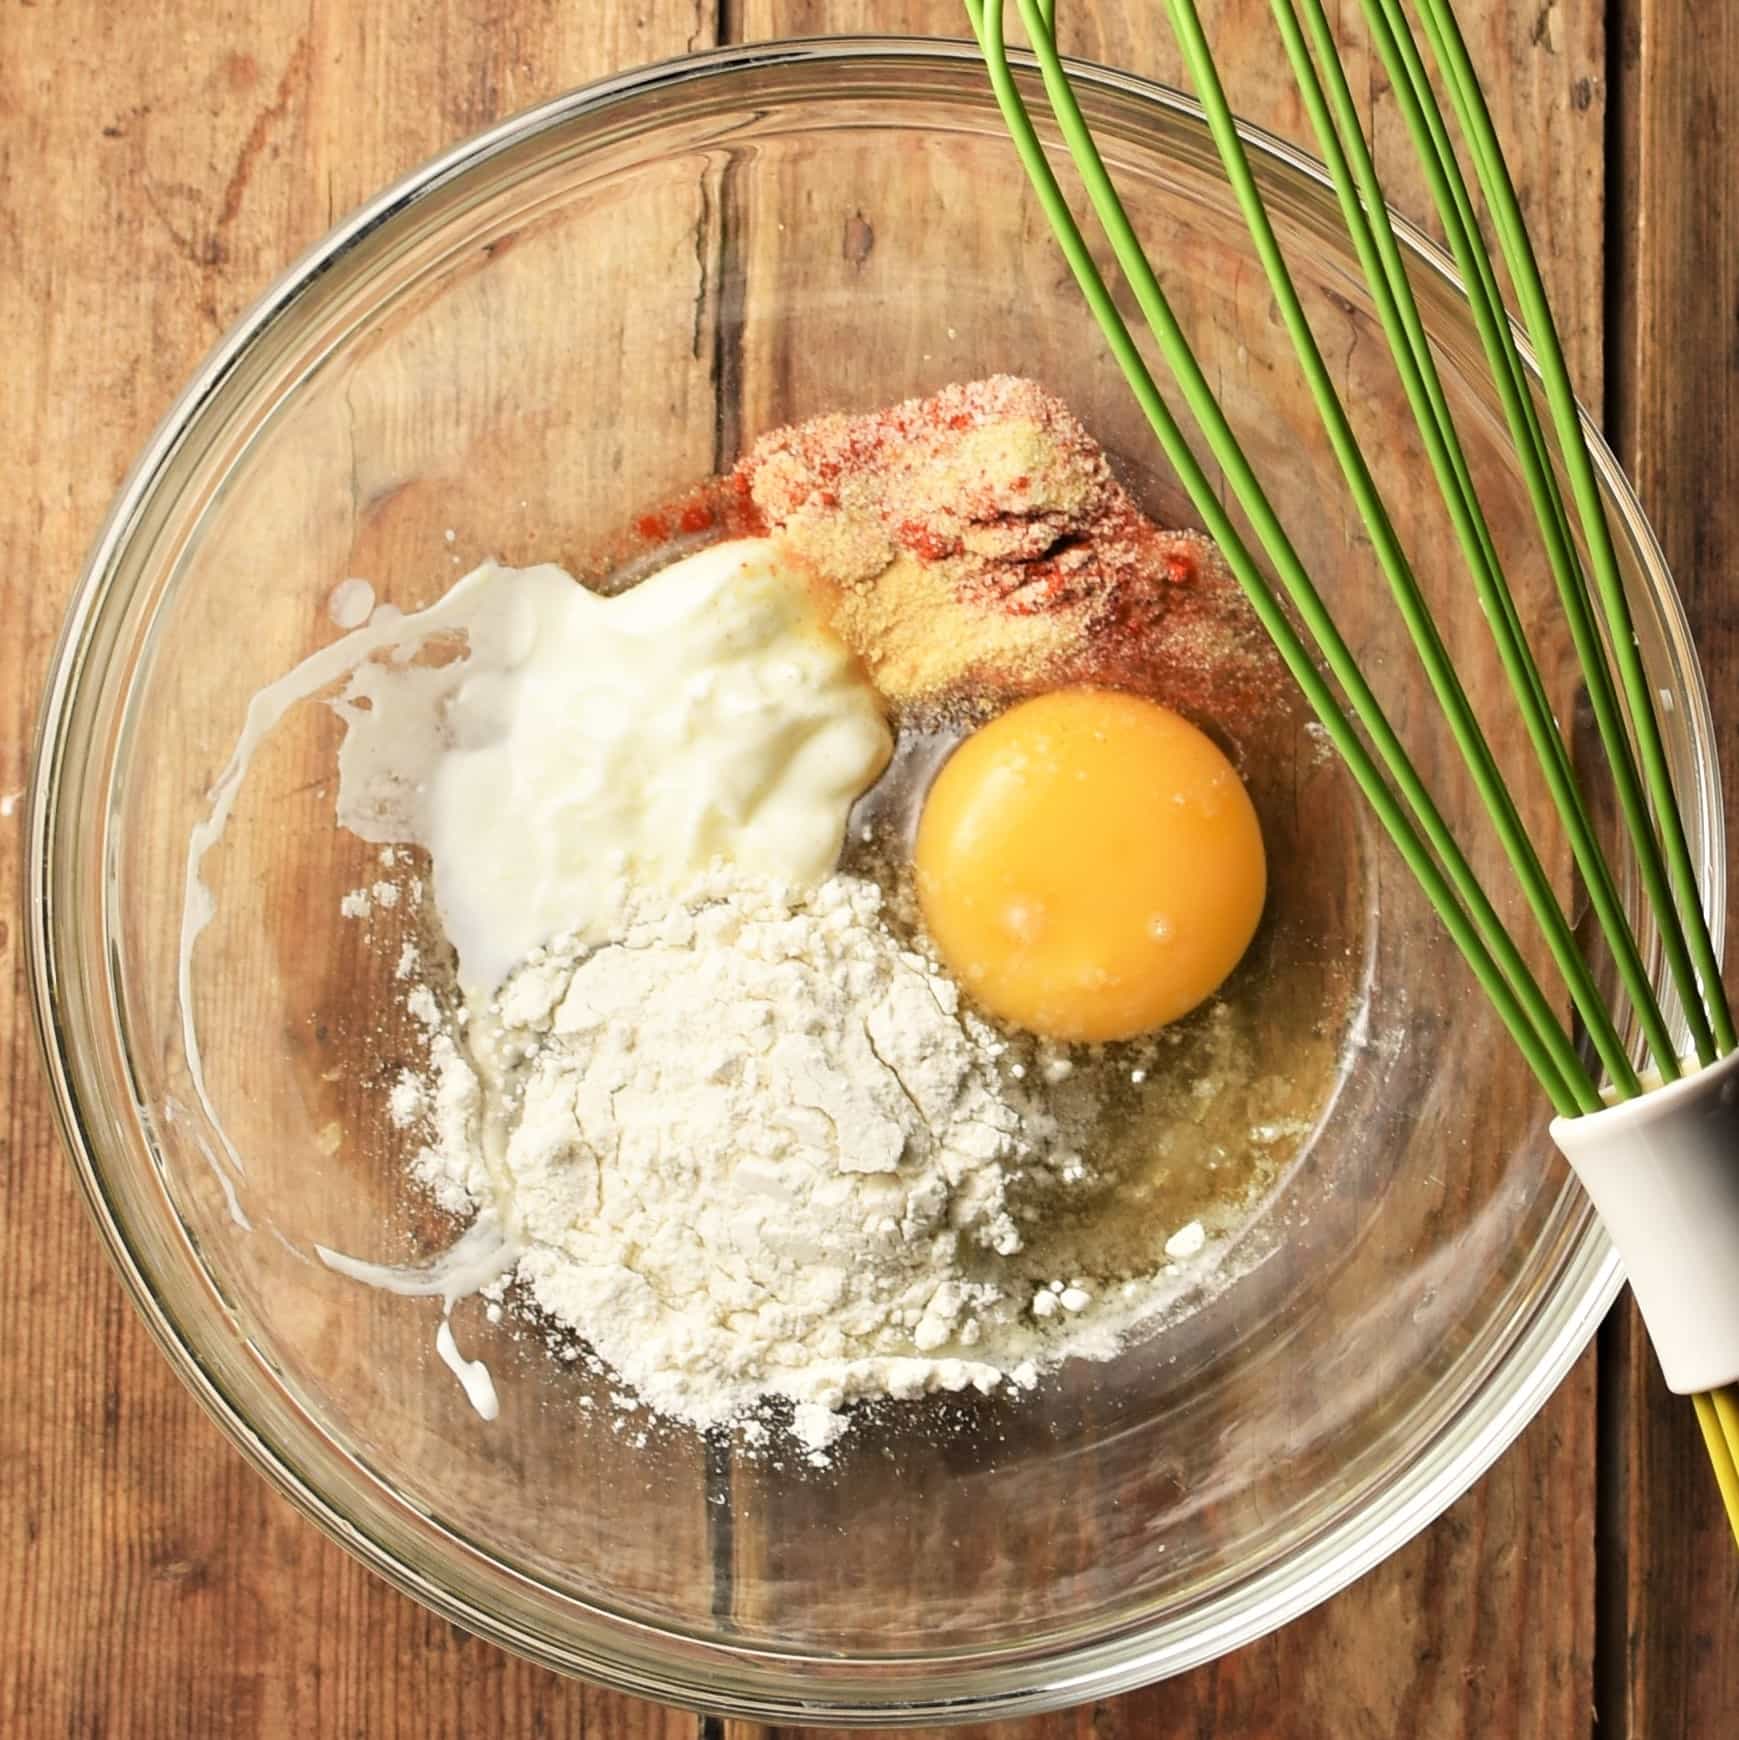 Flour, egg, yogurt and spices in mixing bowl with green whisk.